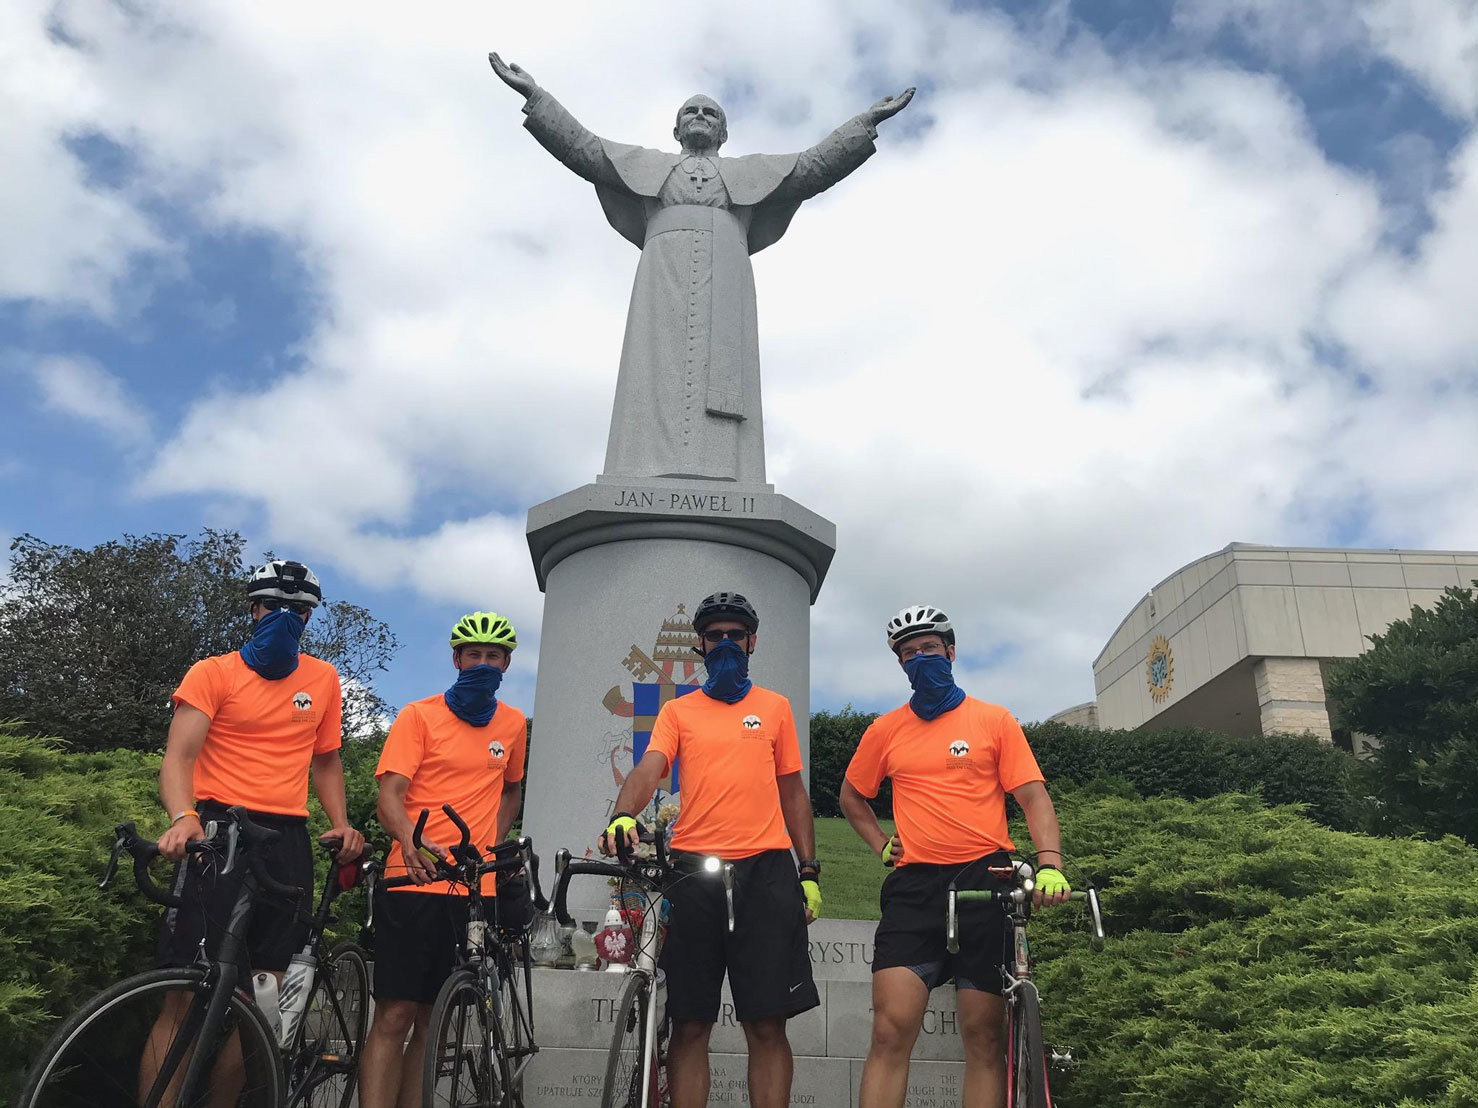 The Perimeter Route bikers take a moment in front of the statue of Pope Saint John Paul II at the National Shrine of Our Lady of Czestochowa in Doylestown. They are, from left, Dominic Mirenda, Chris Massaro, the Rev. Chris Cooke and Tucker Brown.